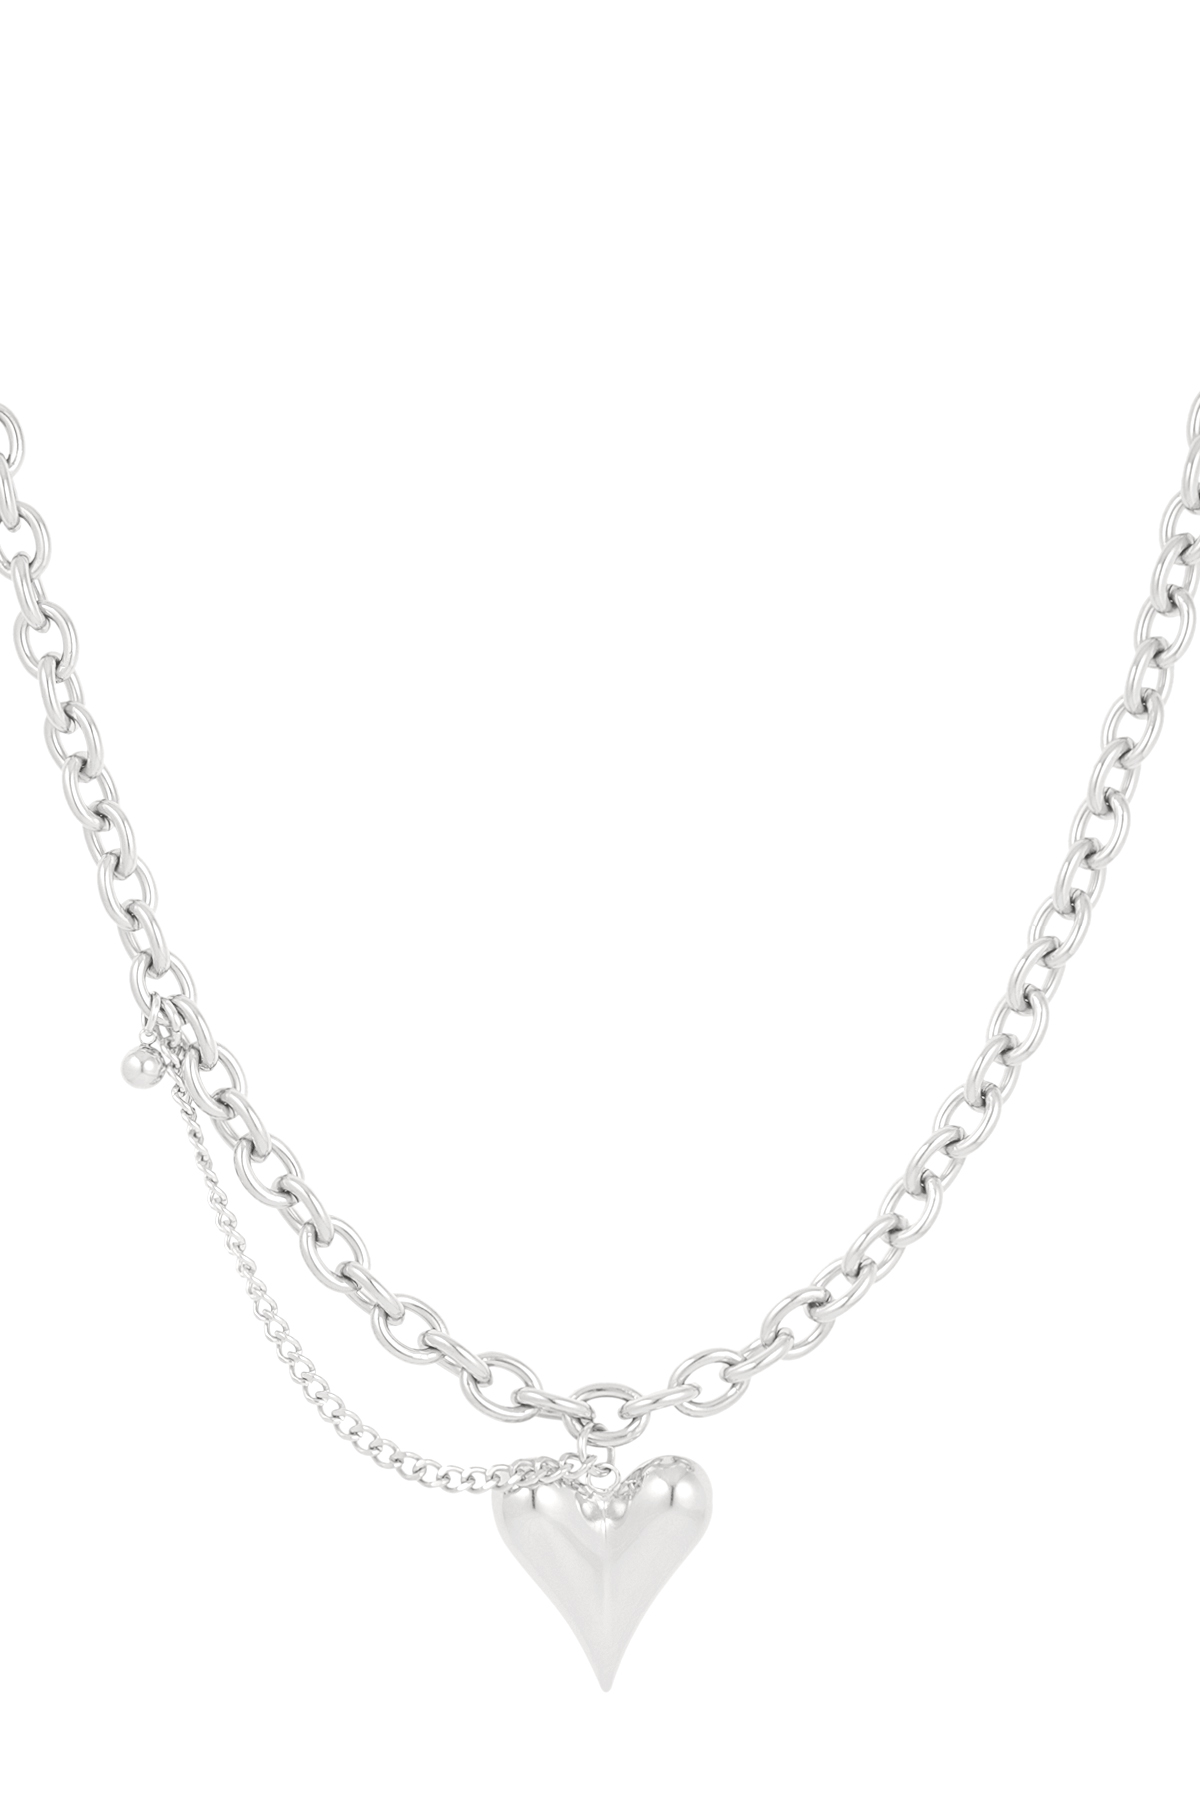 Necklace love life - silver h5 